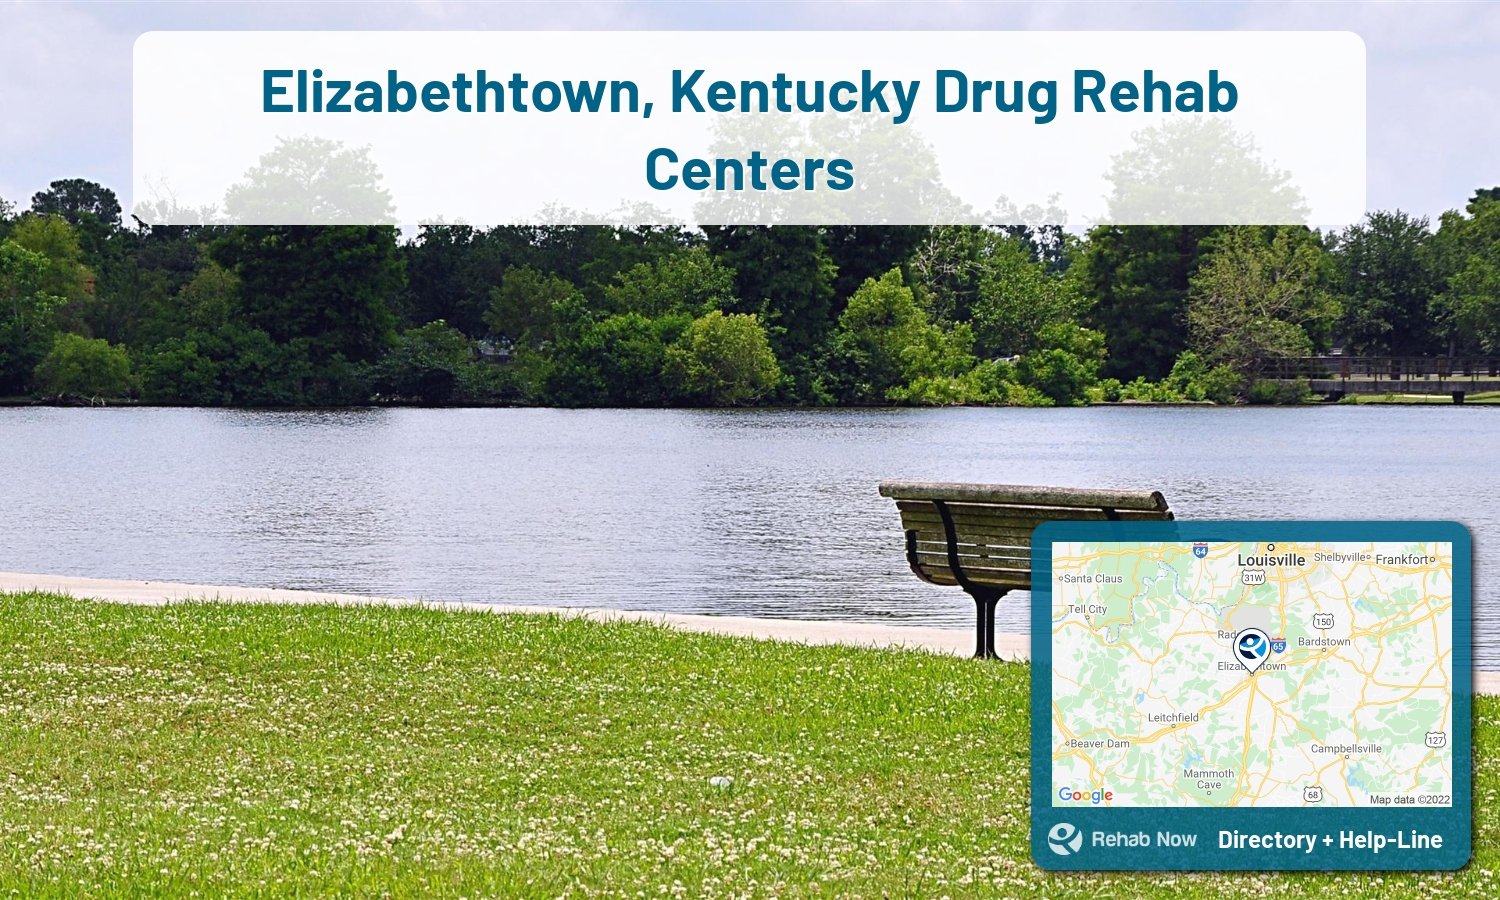 Elizabethtown, KY Treatment Centers. Find drug rehab in Elizabethtown, Kentucky, or detox and treatment programs. Get the right help now!